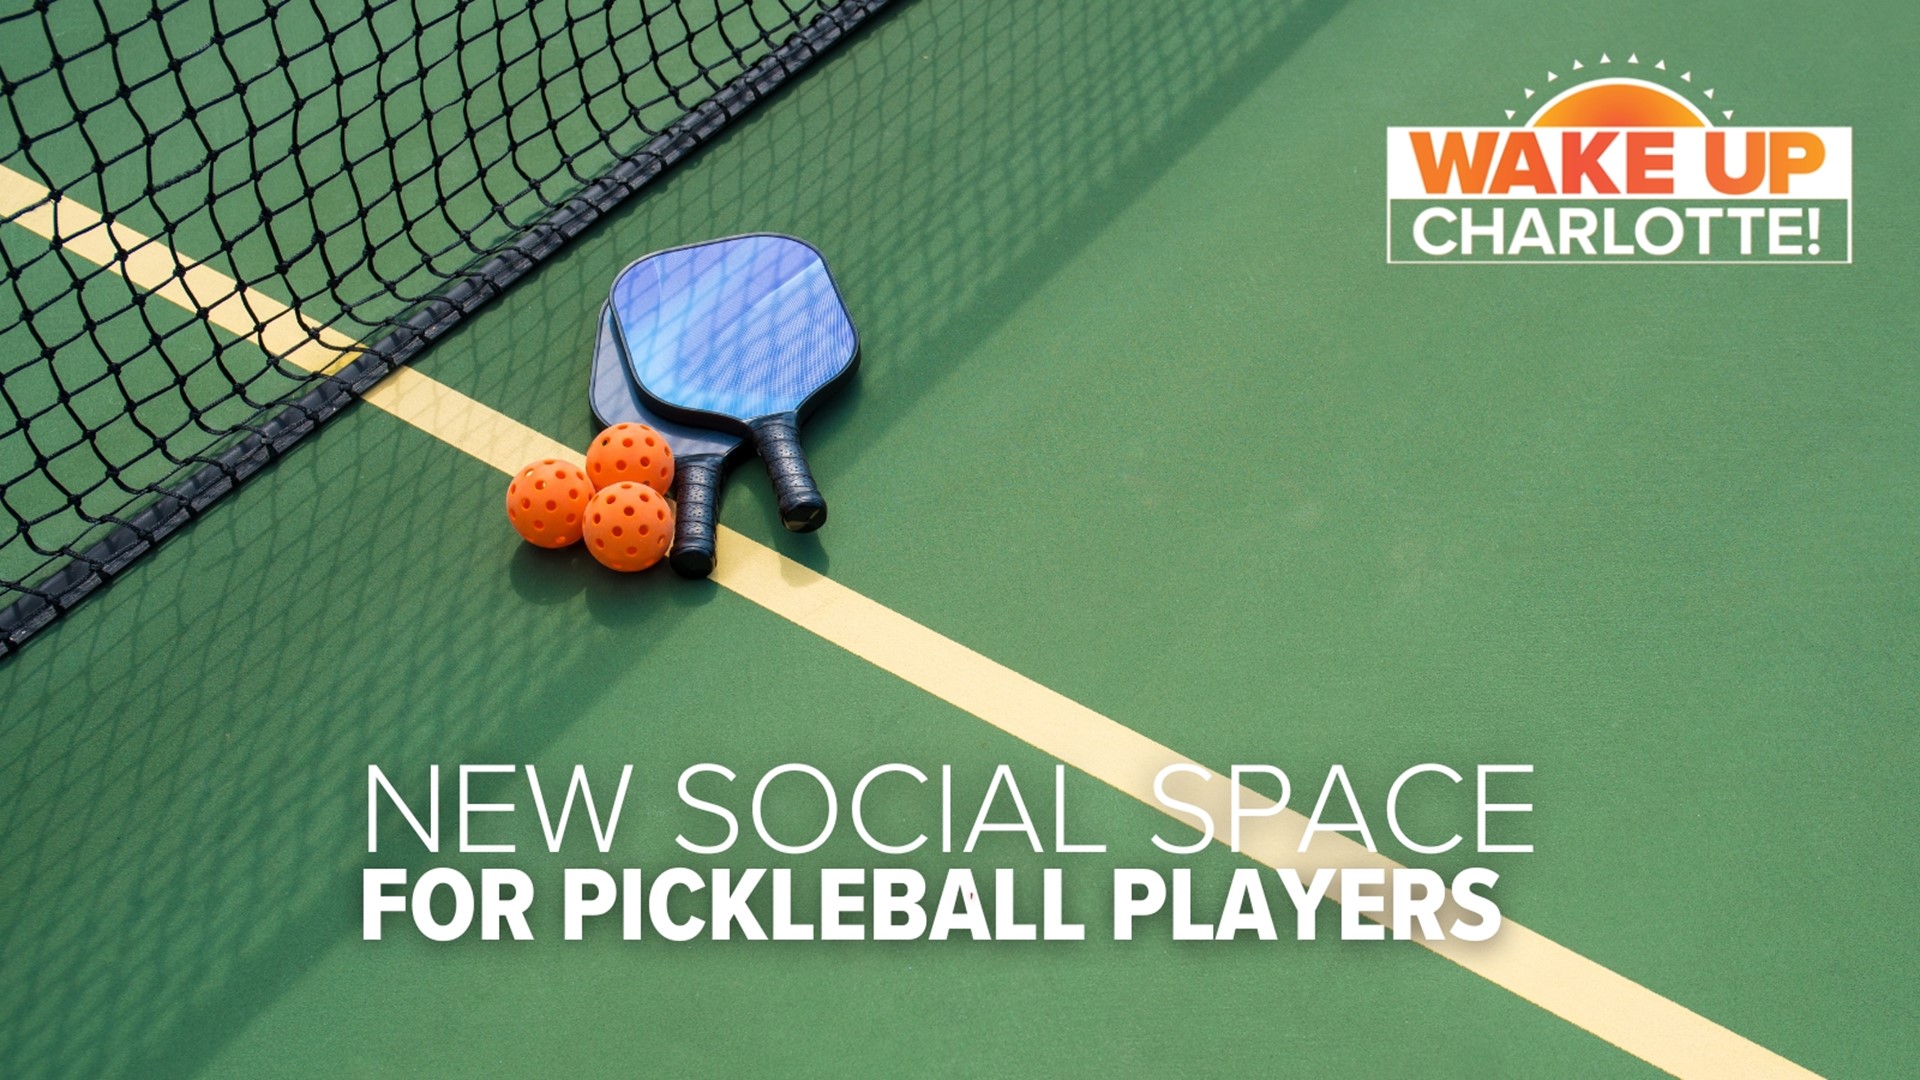 Pickleball is the fastest-growing sport in America. It's a cross between ping pong, badminton and tennis.